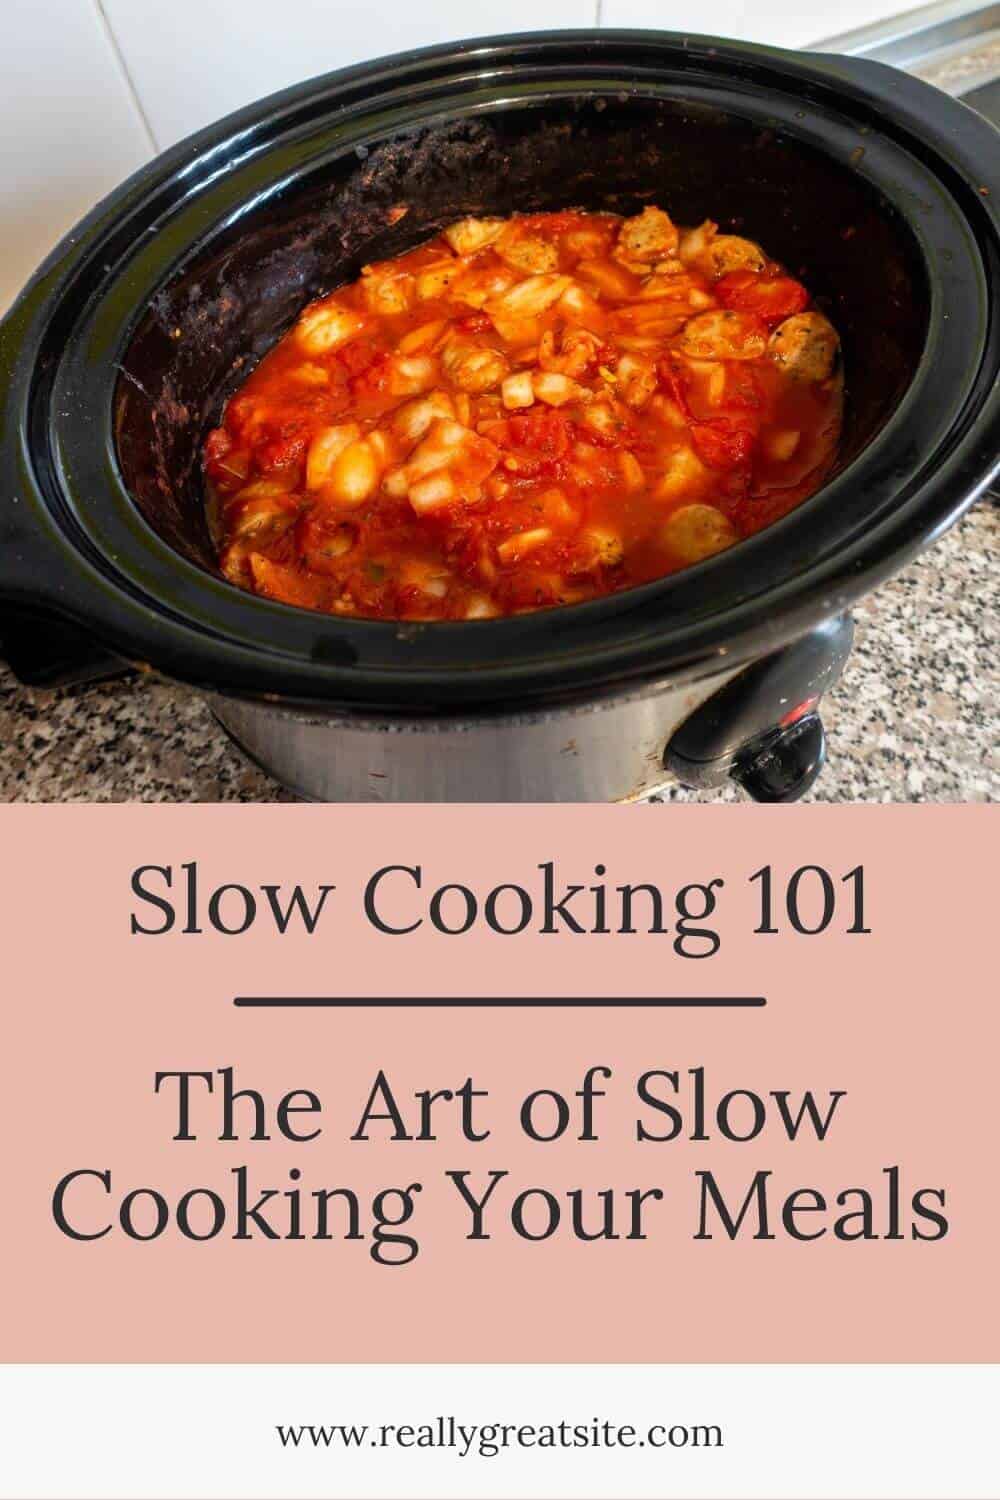 Slow cooker meal with text.